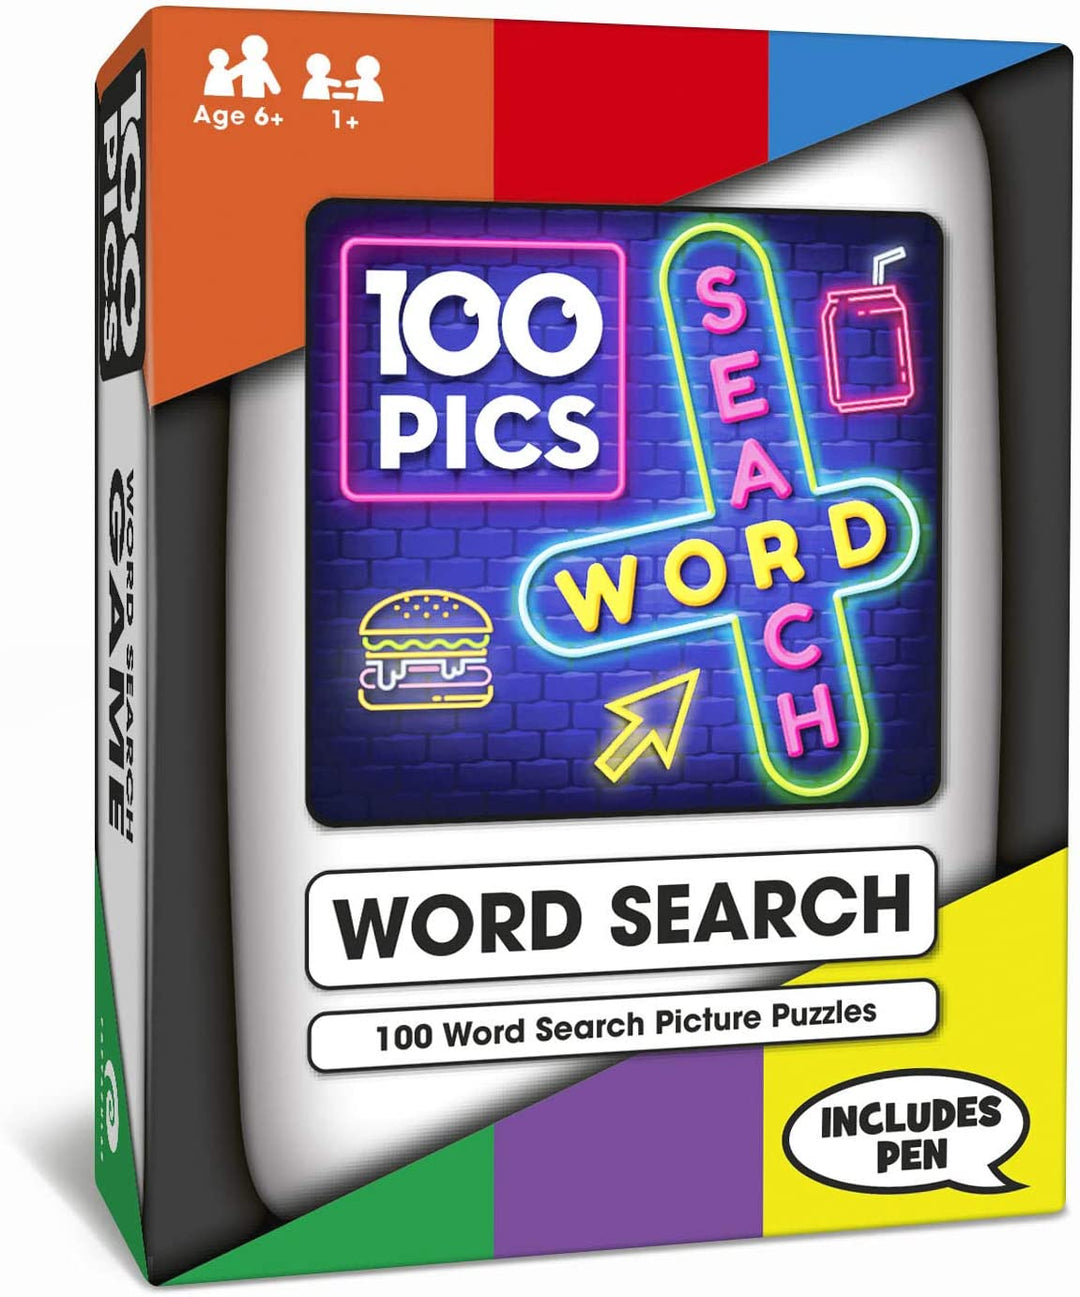 100 PICS Word Search Game - Pocket Puzzle With Picture Clues, Wipe Clean Cards Pen, For Kids And Adults